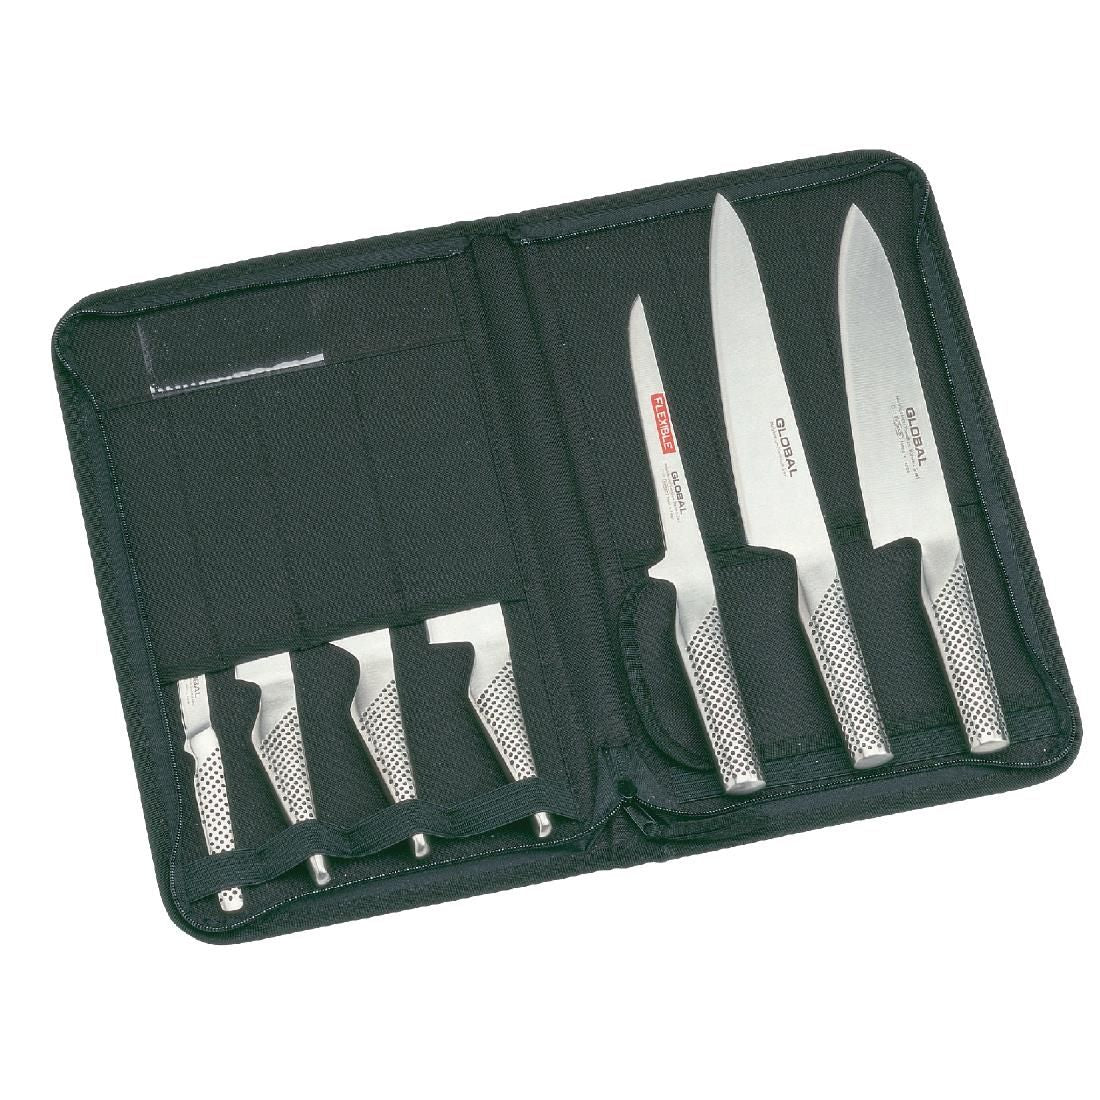 Global 7 Piece Knife Set with Case JD Catering Equipment Solutions Ltd